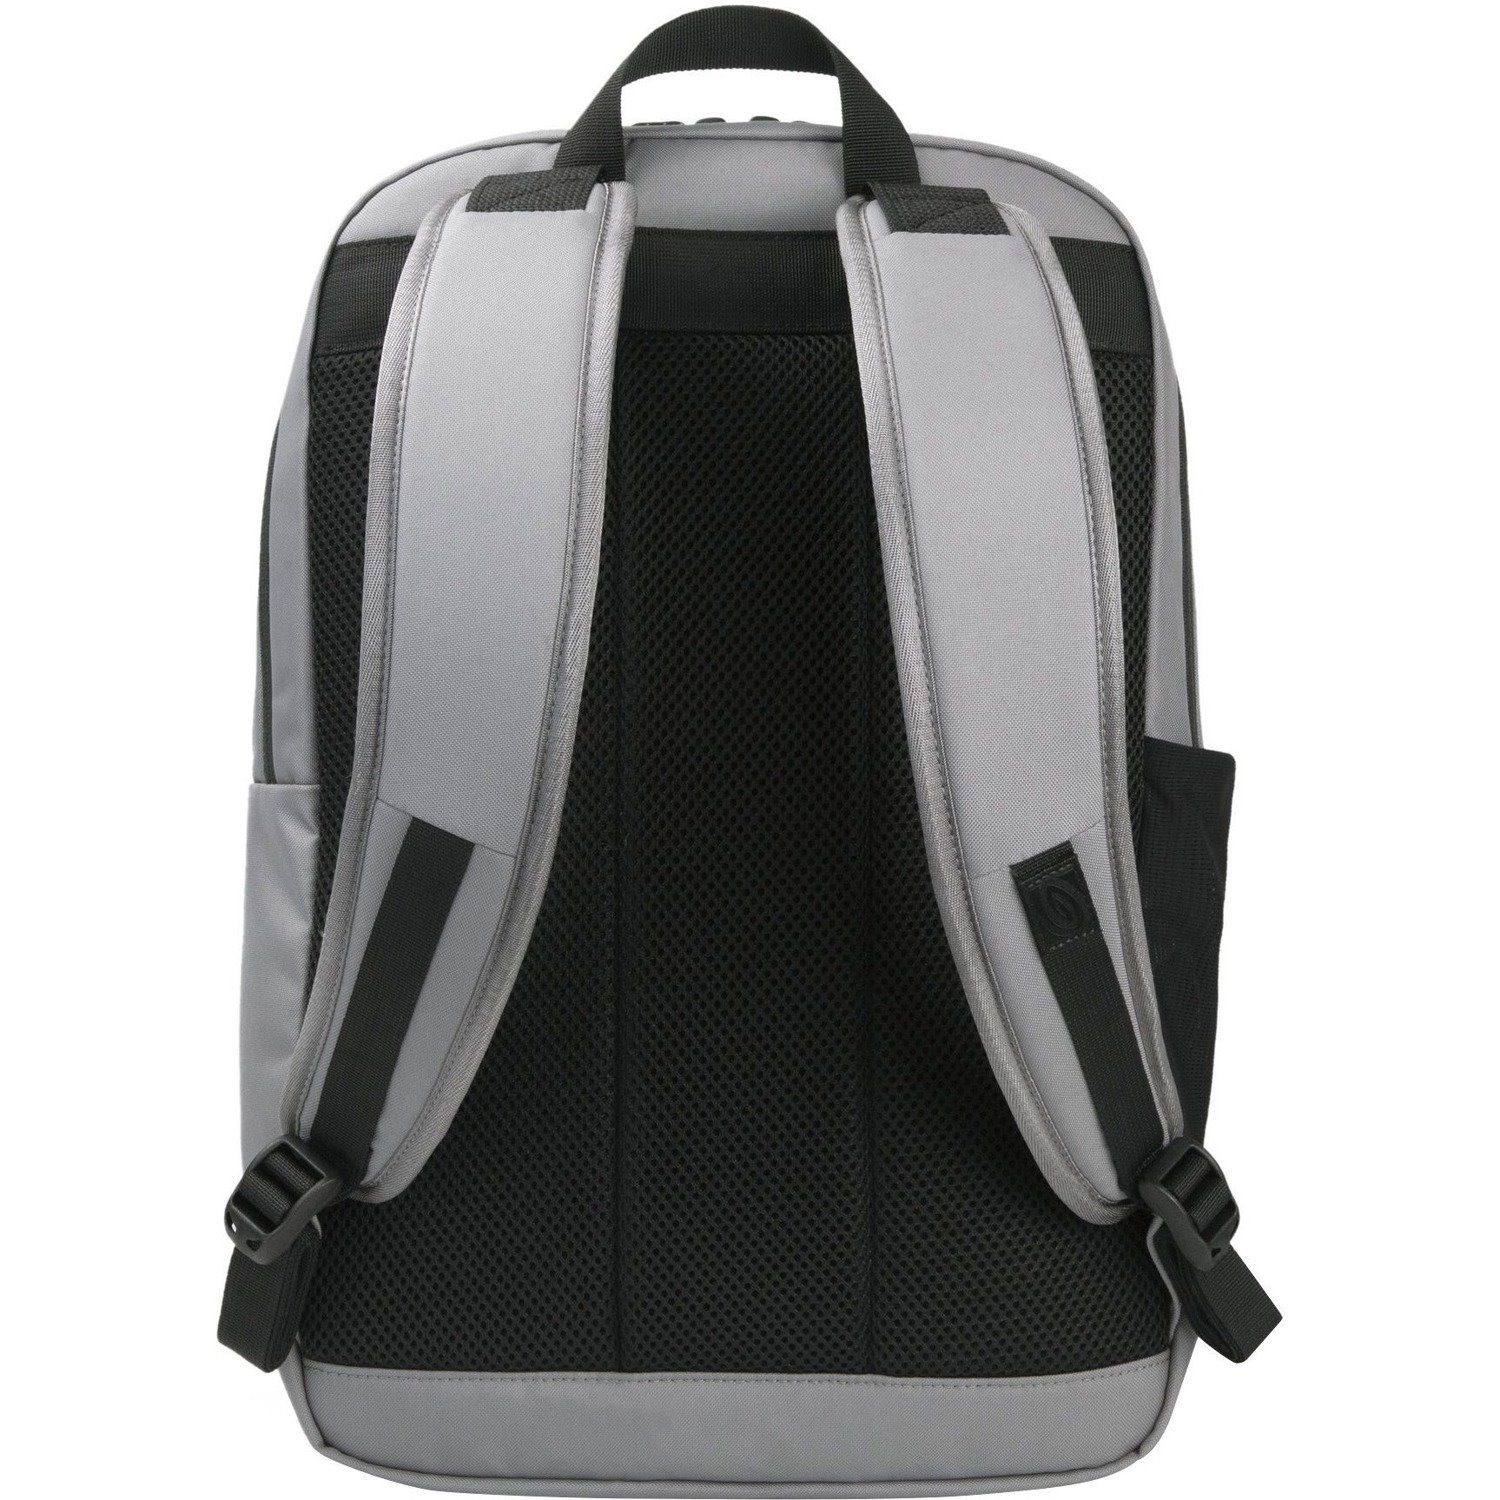 Timbuk2 Parkside Carrying Case (Backpack) for 15" iPad Notebook - Eco Gunmetal